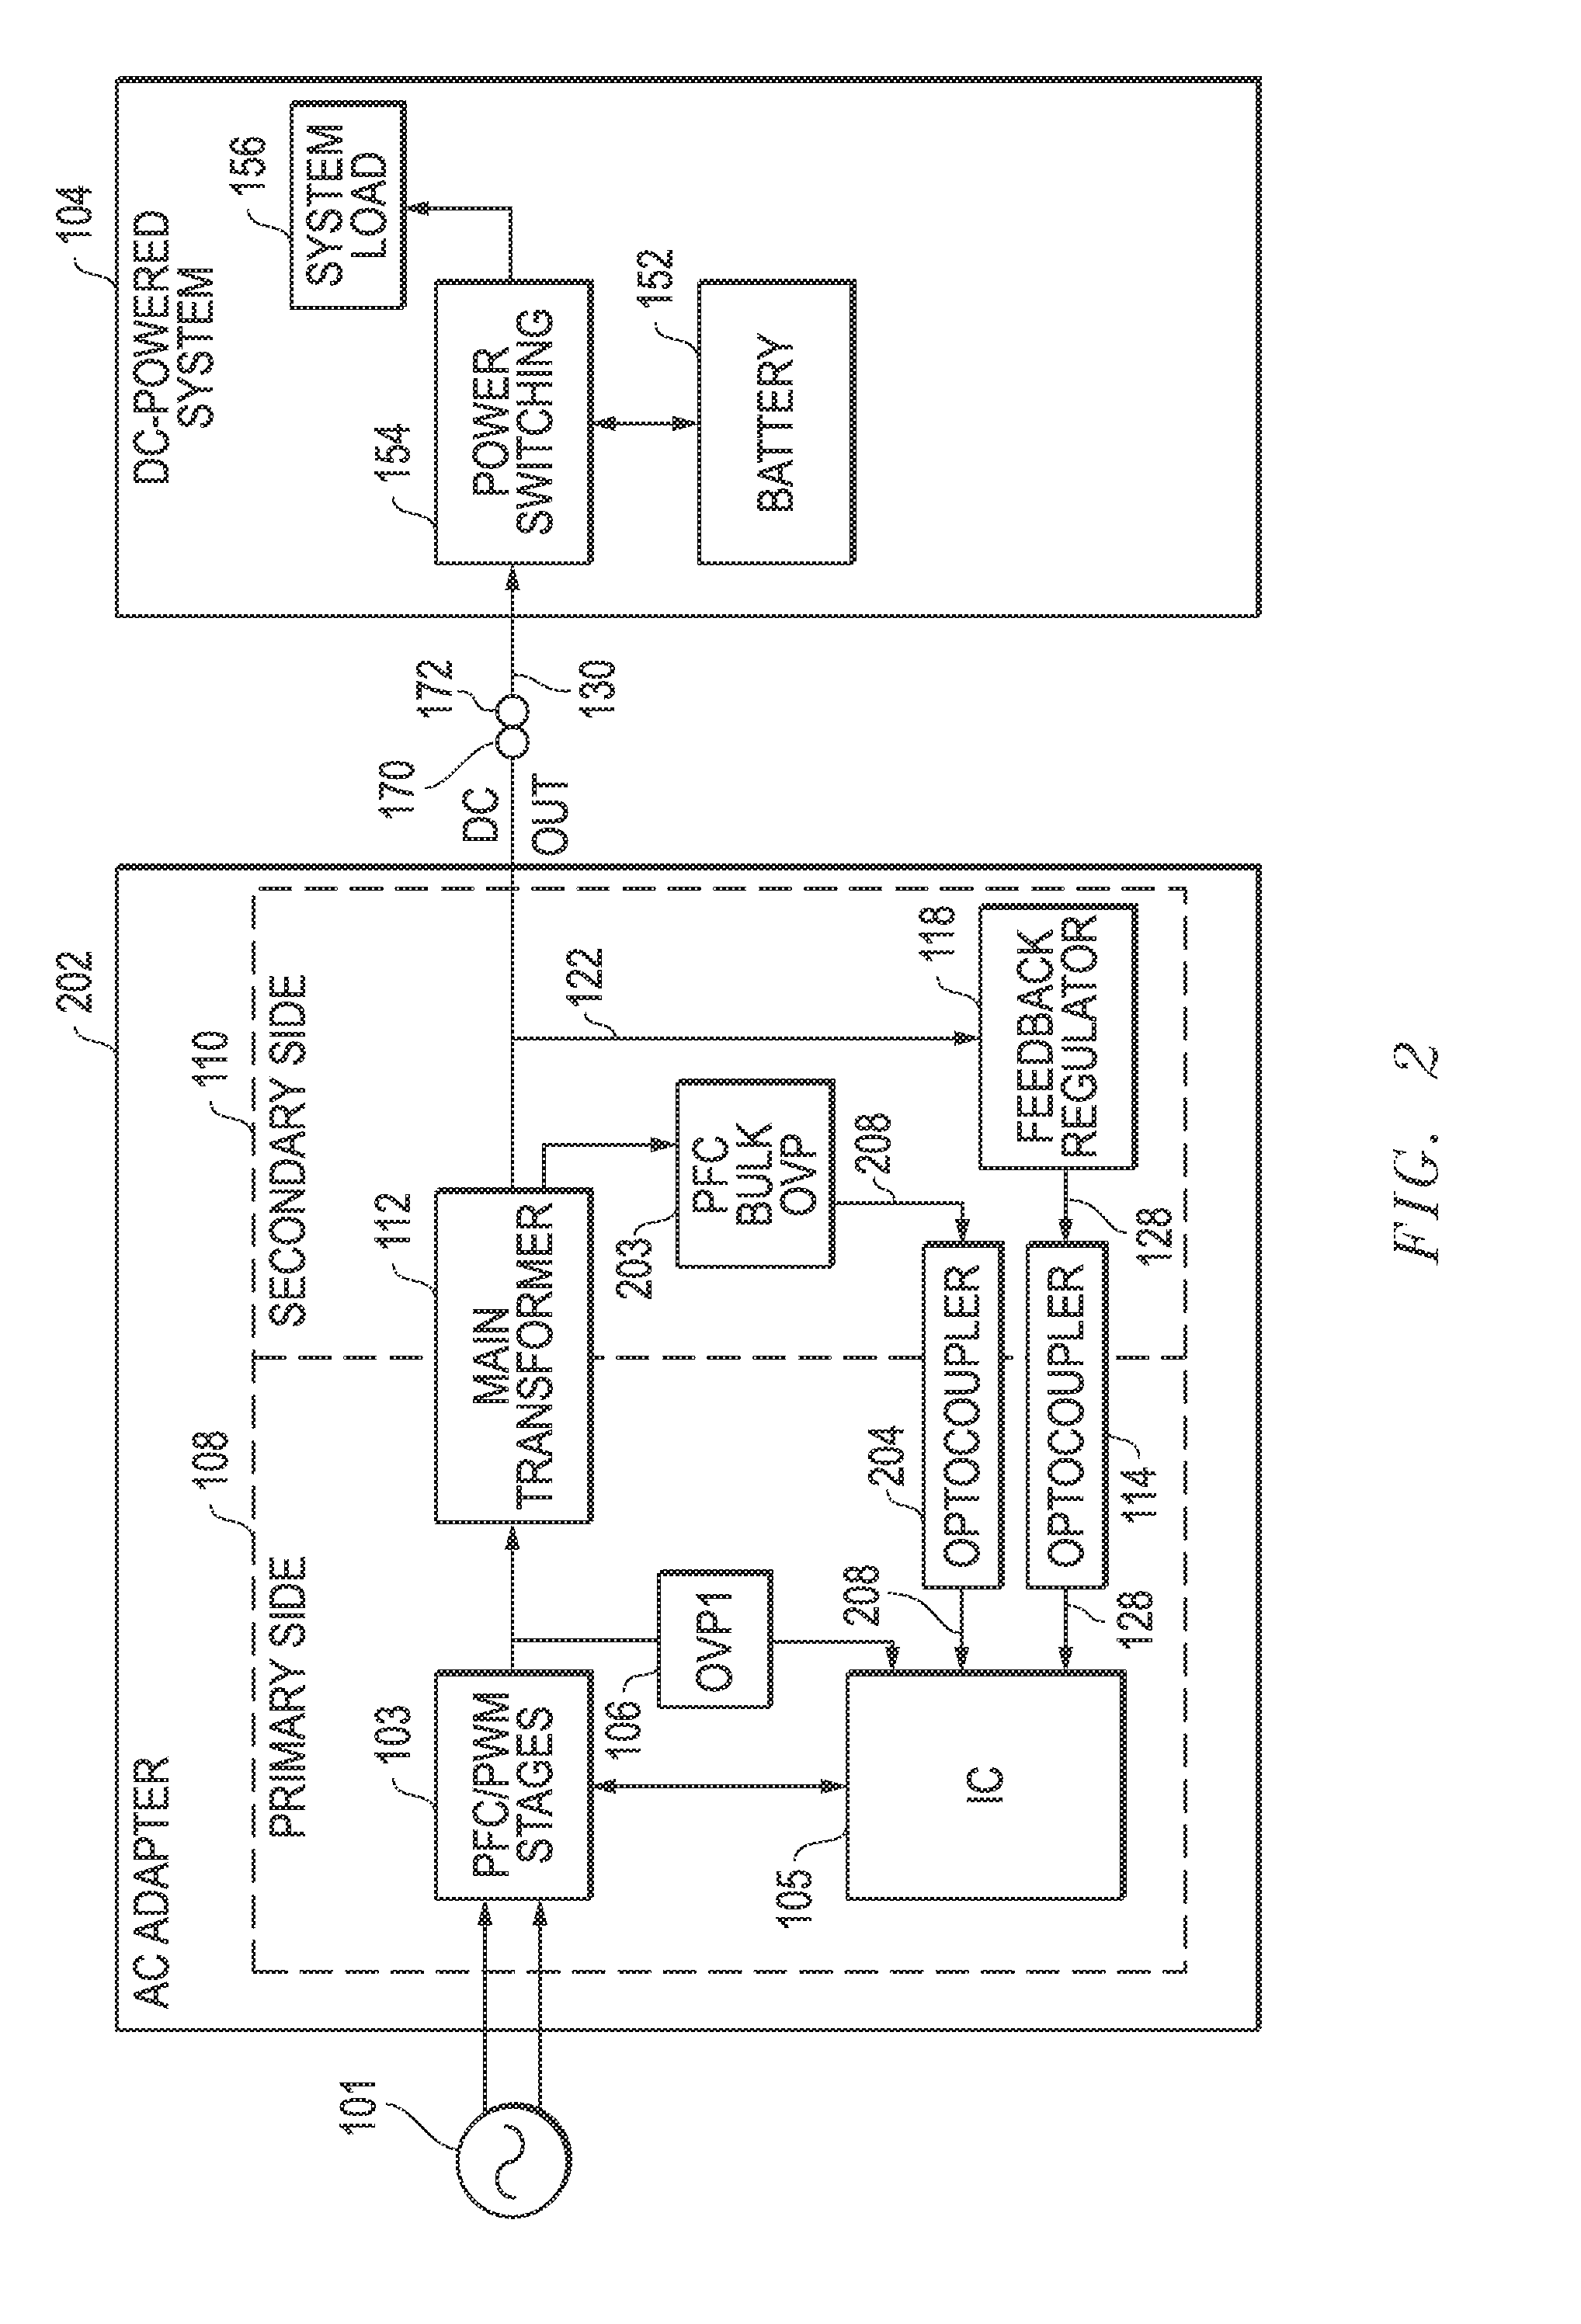 Systems And Methods For Inductive Overvoltage Protection Of PFC Buk Capacitors In Power Supplies